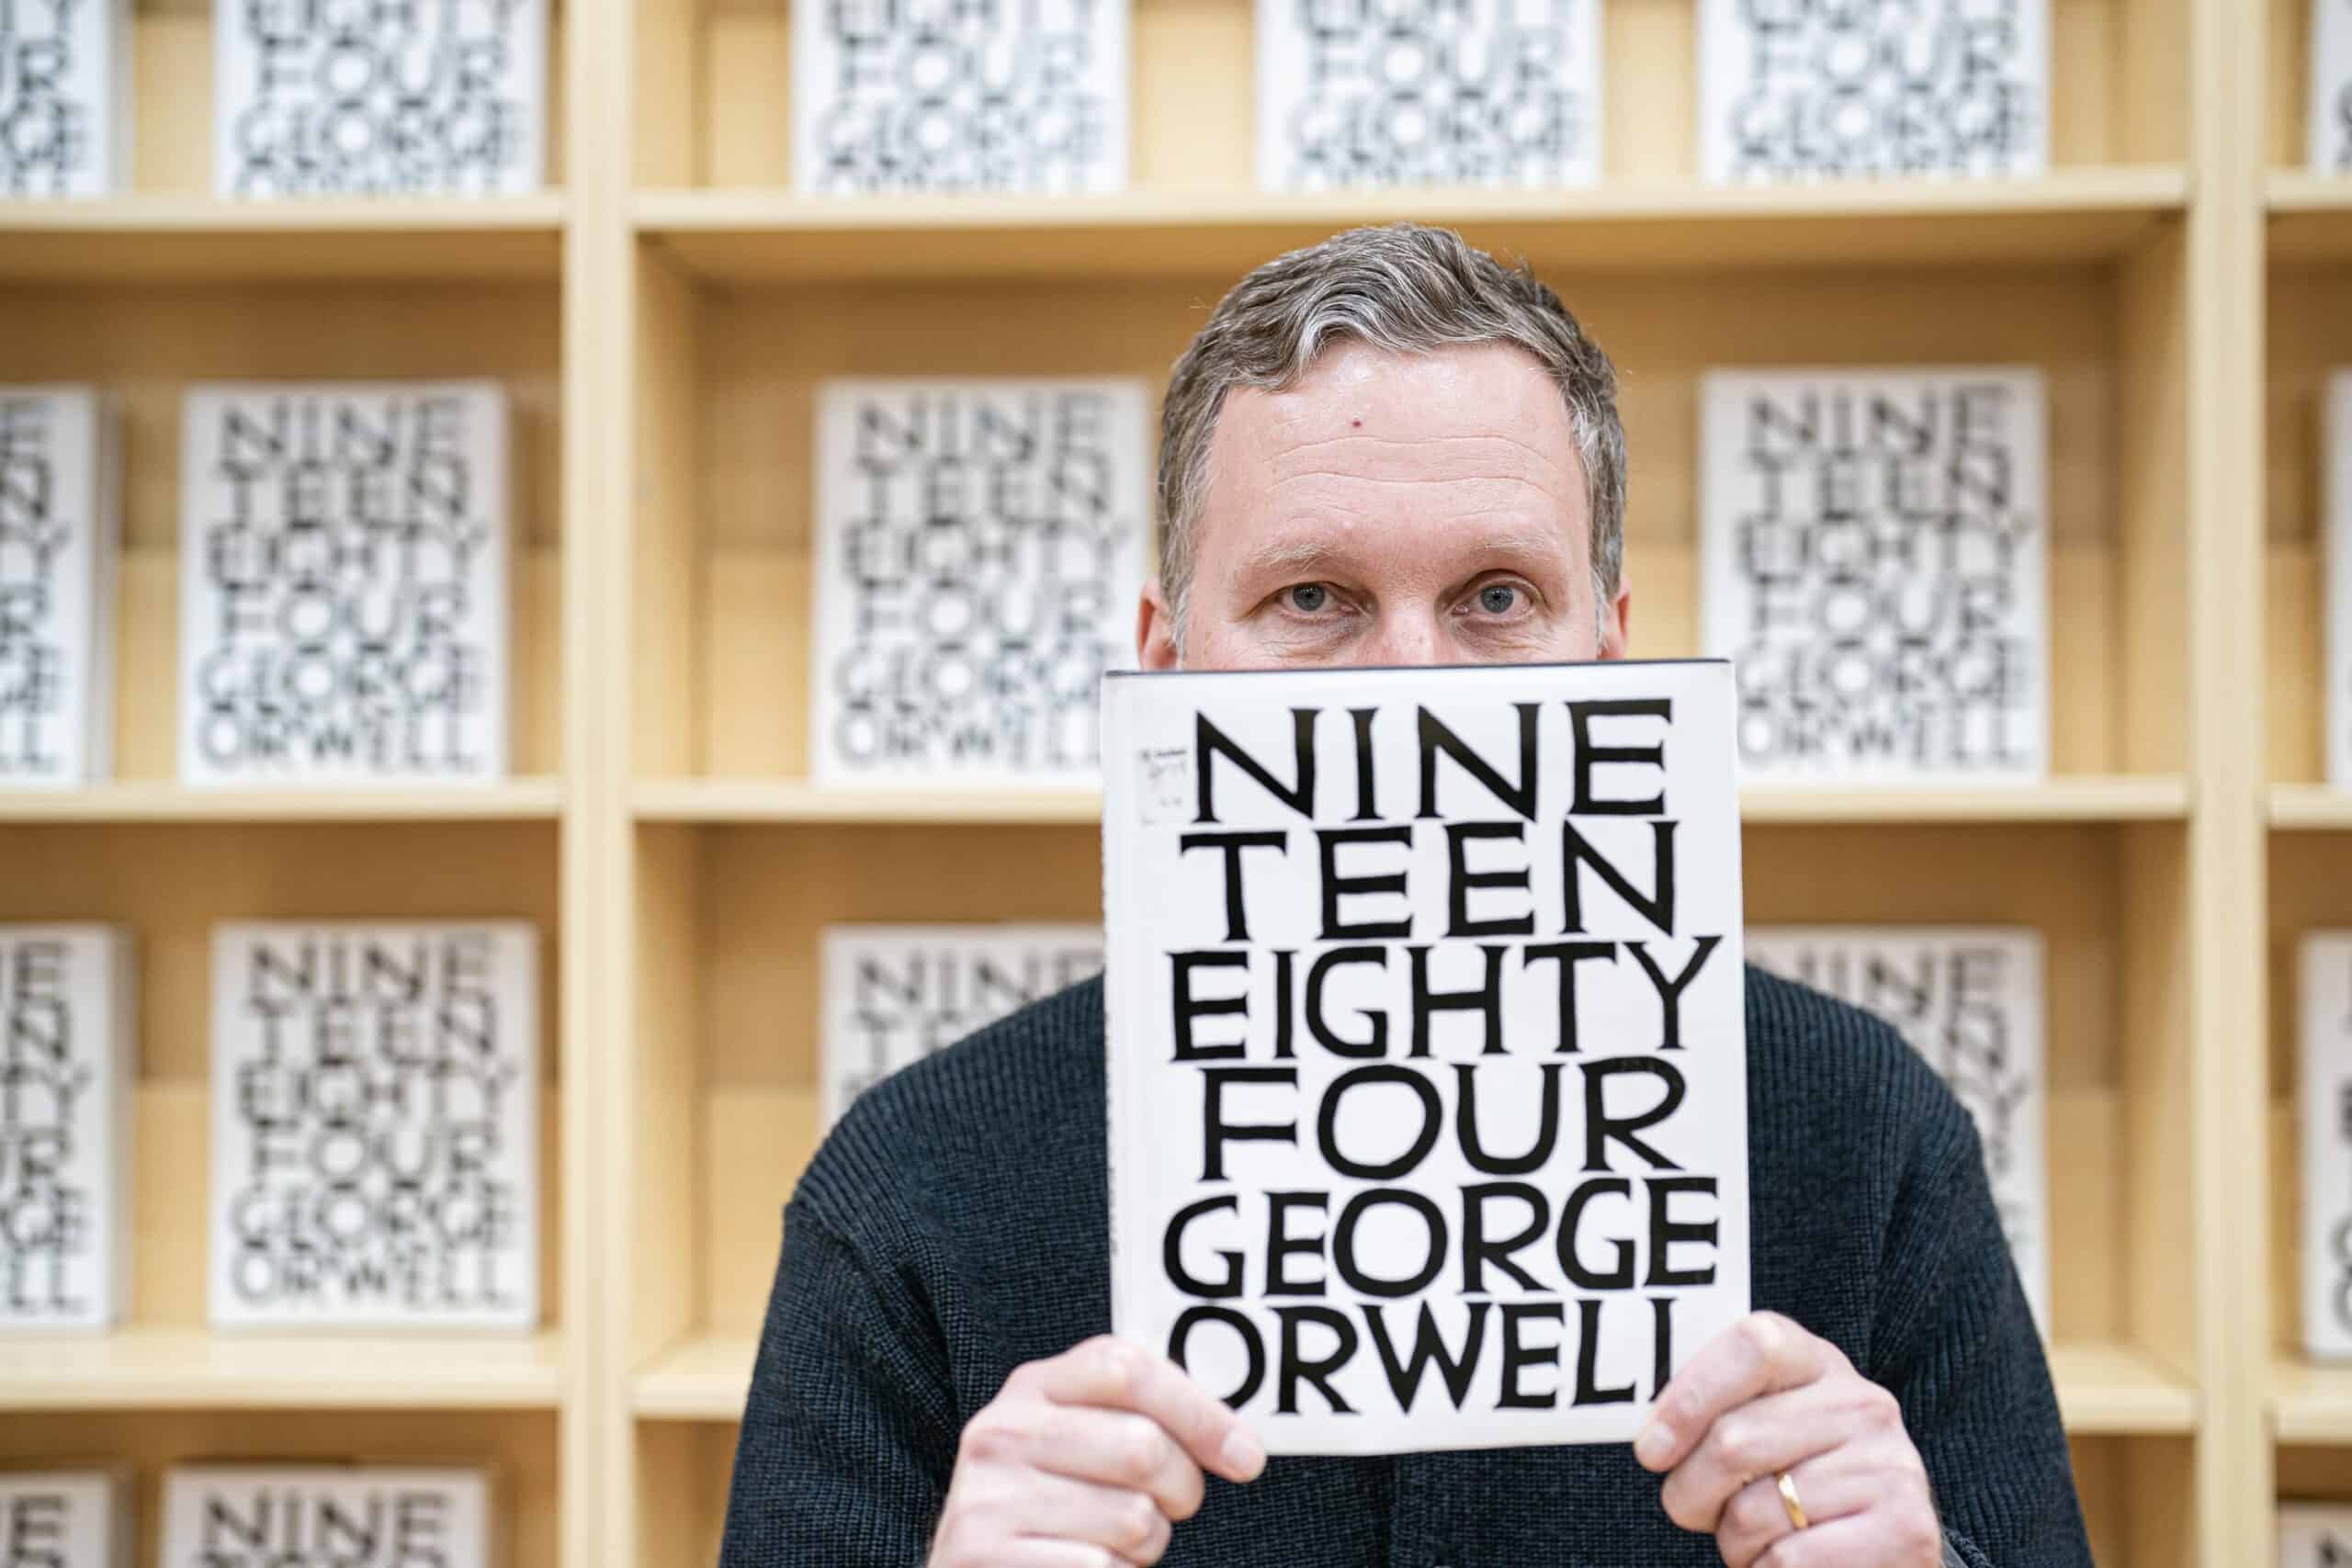 Pop-up shop to sell Orwell’s Nineteen Eighty-Four made from pulped copies of The Da Vinci Code